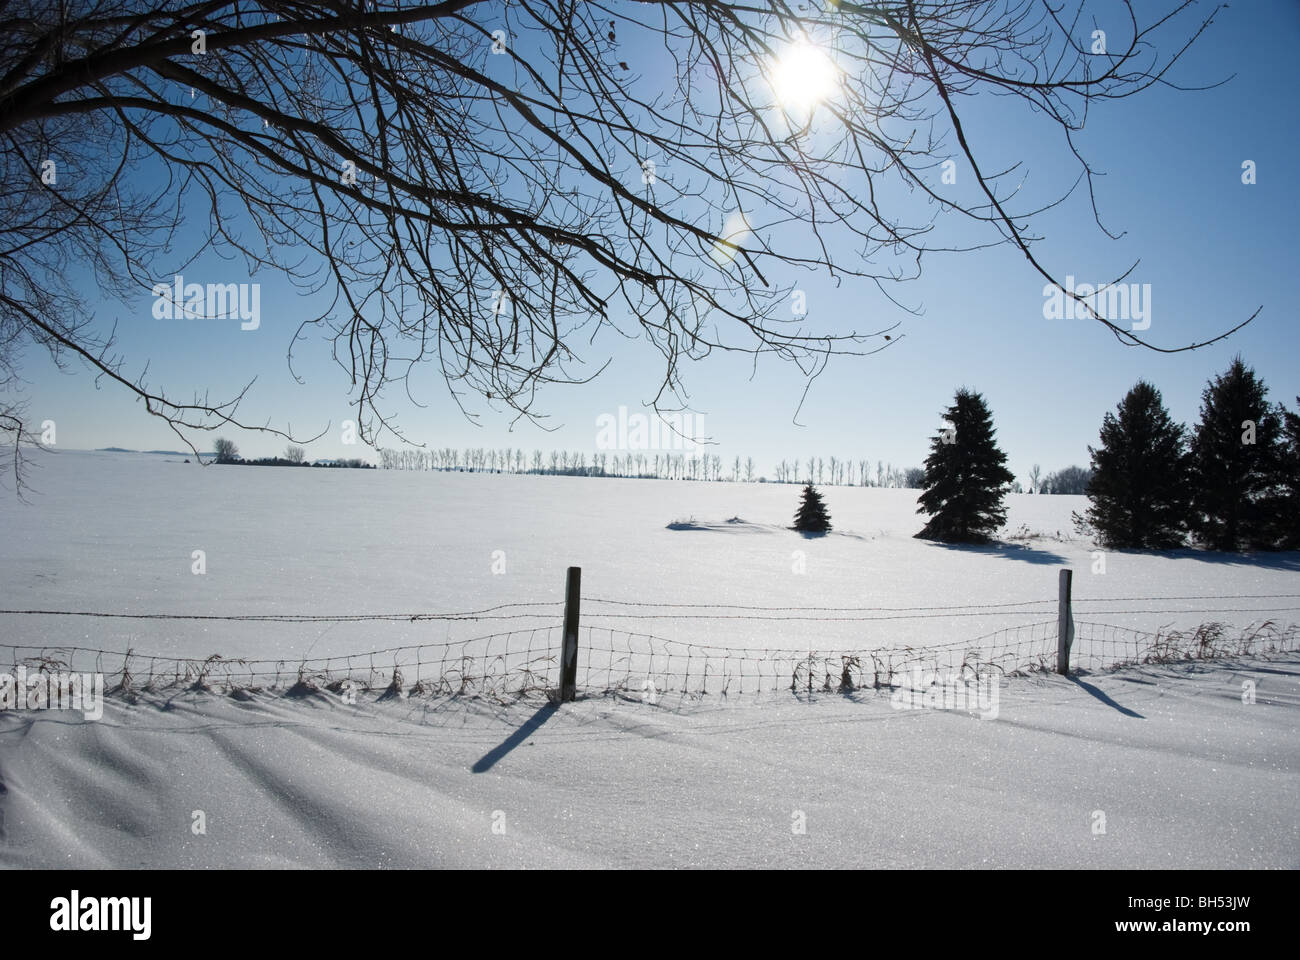 In a deep blue sky, the December sun shines on bright new snow, with a fence casting shadows and white haze on the prairie horiz Stock Photo